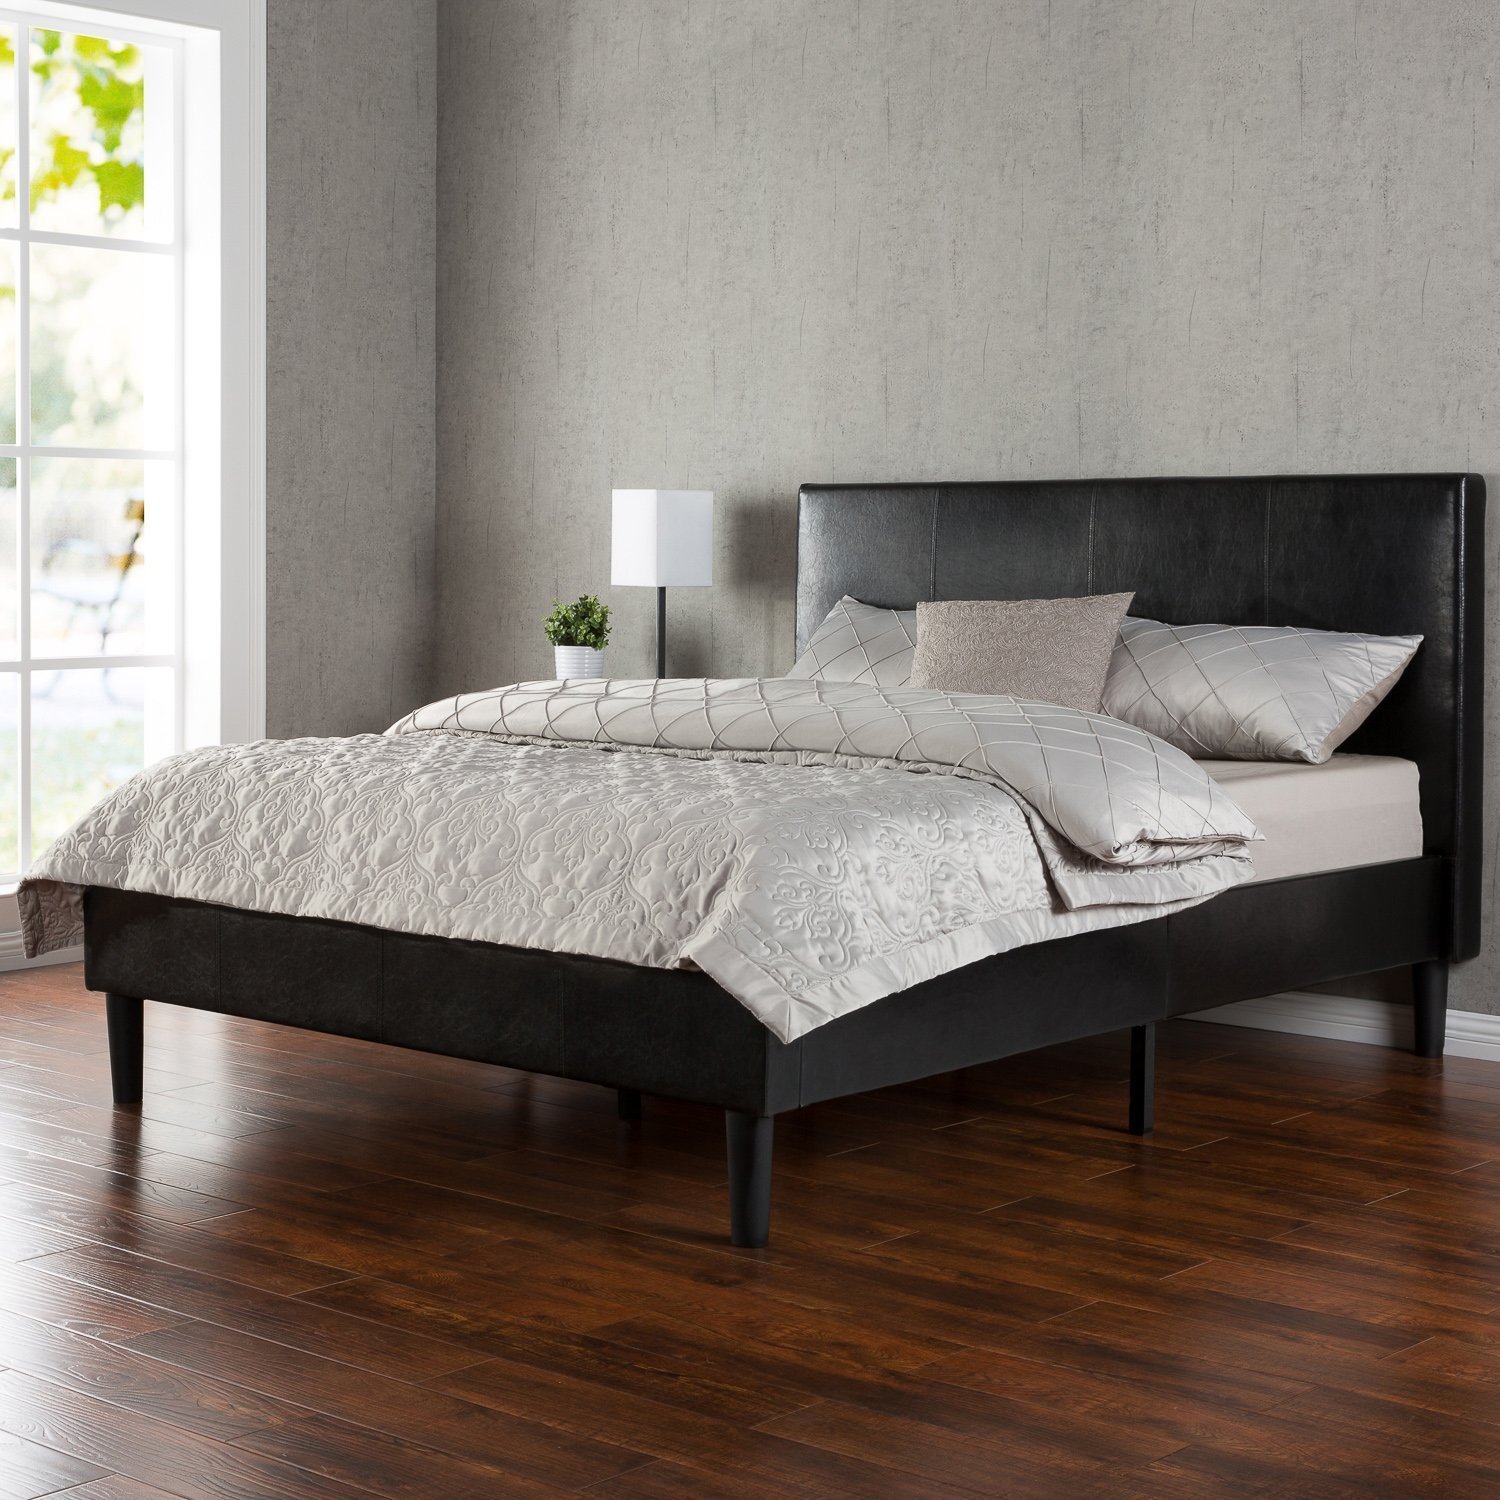 King Zinus Deluxe Faux Leather platform bed for $179 shipped, queen for $149